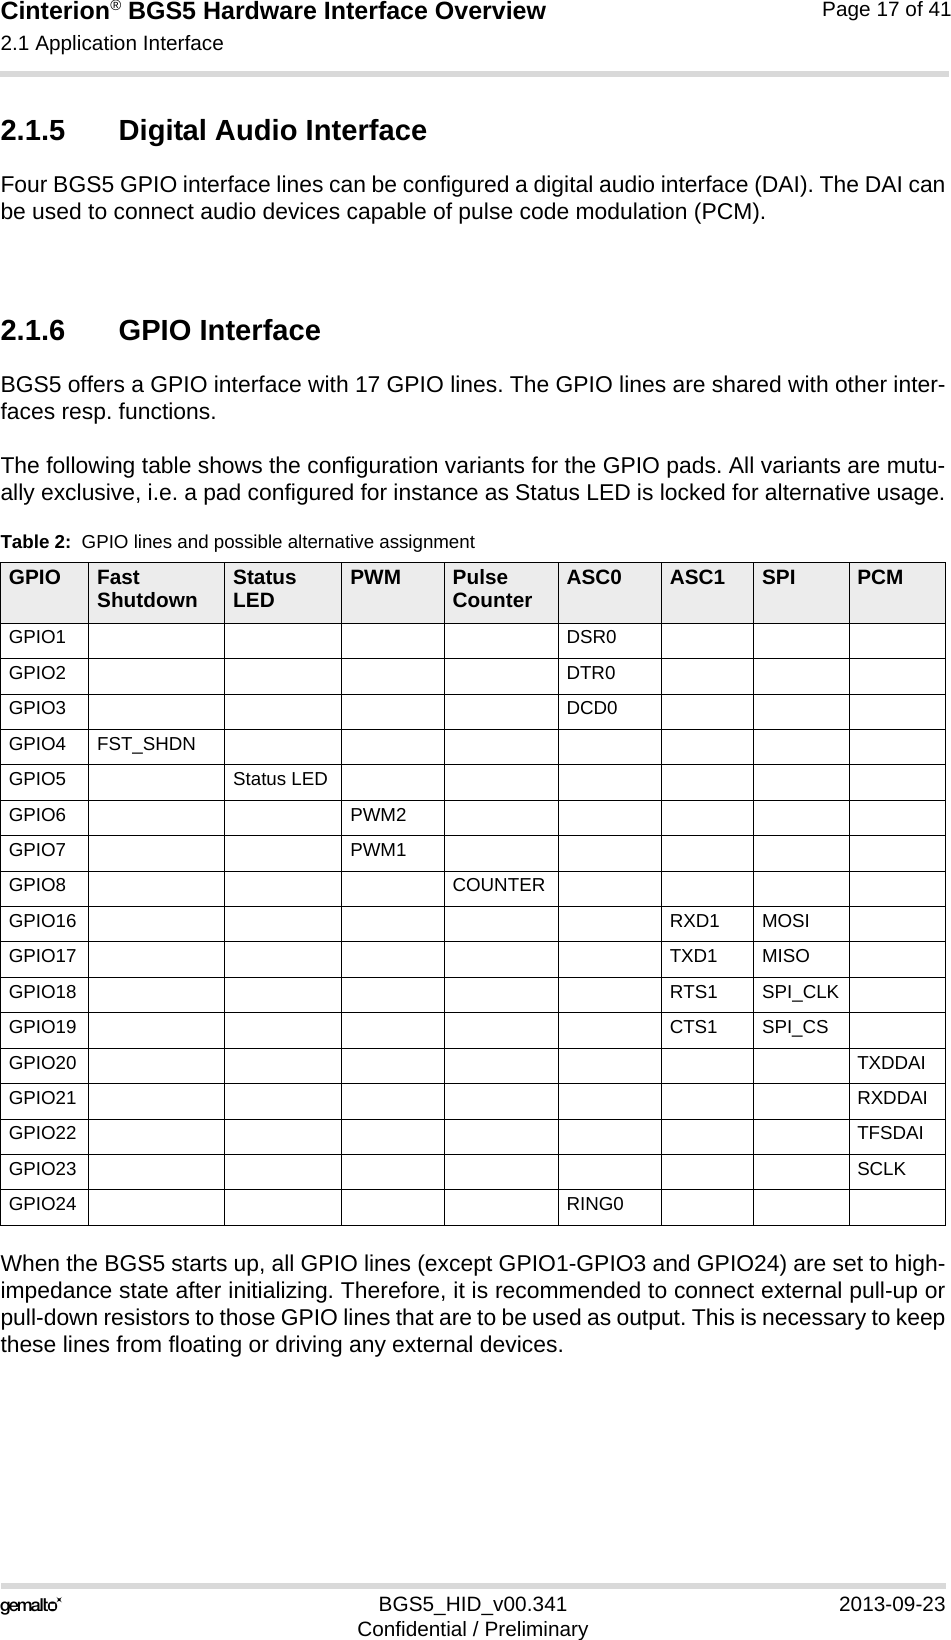 Cinterion® BGS5 Hardware Interface Overview2.1 Application Interface23BGS5_HID_v00.341 2013-09-23Confidential / PreliminaryPage 17 of 412.1.5 Digital Audio InterfaceFour BGS5 GPIO interface lines can be configured a digital audio interface (DAI). The DAI canbe used to connect audio devices capable of pulse code modulation (PCM). 2.1.6 GPIO InterfaceBGS5 offers a GPIO interface with 17 GPIO lines. The GPIO lines are shared with other inter-faces resp. functions.The following table shows the configuration variants for the GPIO pads. All variants are mutu-ally exclusive, i.e. a pad configured for instance as Status LED is locked for alternative usage.When the BGS5 starts up, all GPIO lines (except GPIO1-GPIO3 and GPIO24) are set to high-impedance state after initializing. Therefore, it is recommended to connect external pull-up orpull-down resistors to those GPIO lines that are to be used as output. This is necessary to keepthese lines from floating or driving any external devices.Table 2:  GPIO lines and possible alternative assignmentGPIO Fast Shutdown Status LED PWM Pulse Counter ASC0 ASC1 SPI PCMGPIO1 DSR0GPIO2 DTR0GPIO3 DCD0GPIO4 FST_SHDNGPIO5 Status LEDGPIO6 PWM2GPIO7 PWM1GPIO8 COUNTERGPIO16 RXD1 MOSIGPIO17 TXD1 MISOGPIO18 RTS1 SPI_CLKGPIO19 CTS1 SPI_CSGPIO20 TXDDAIGPIO21 RXDDAIGPIO22 TFSDAIGPIO23 SCLKGPIO24 RING0